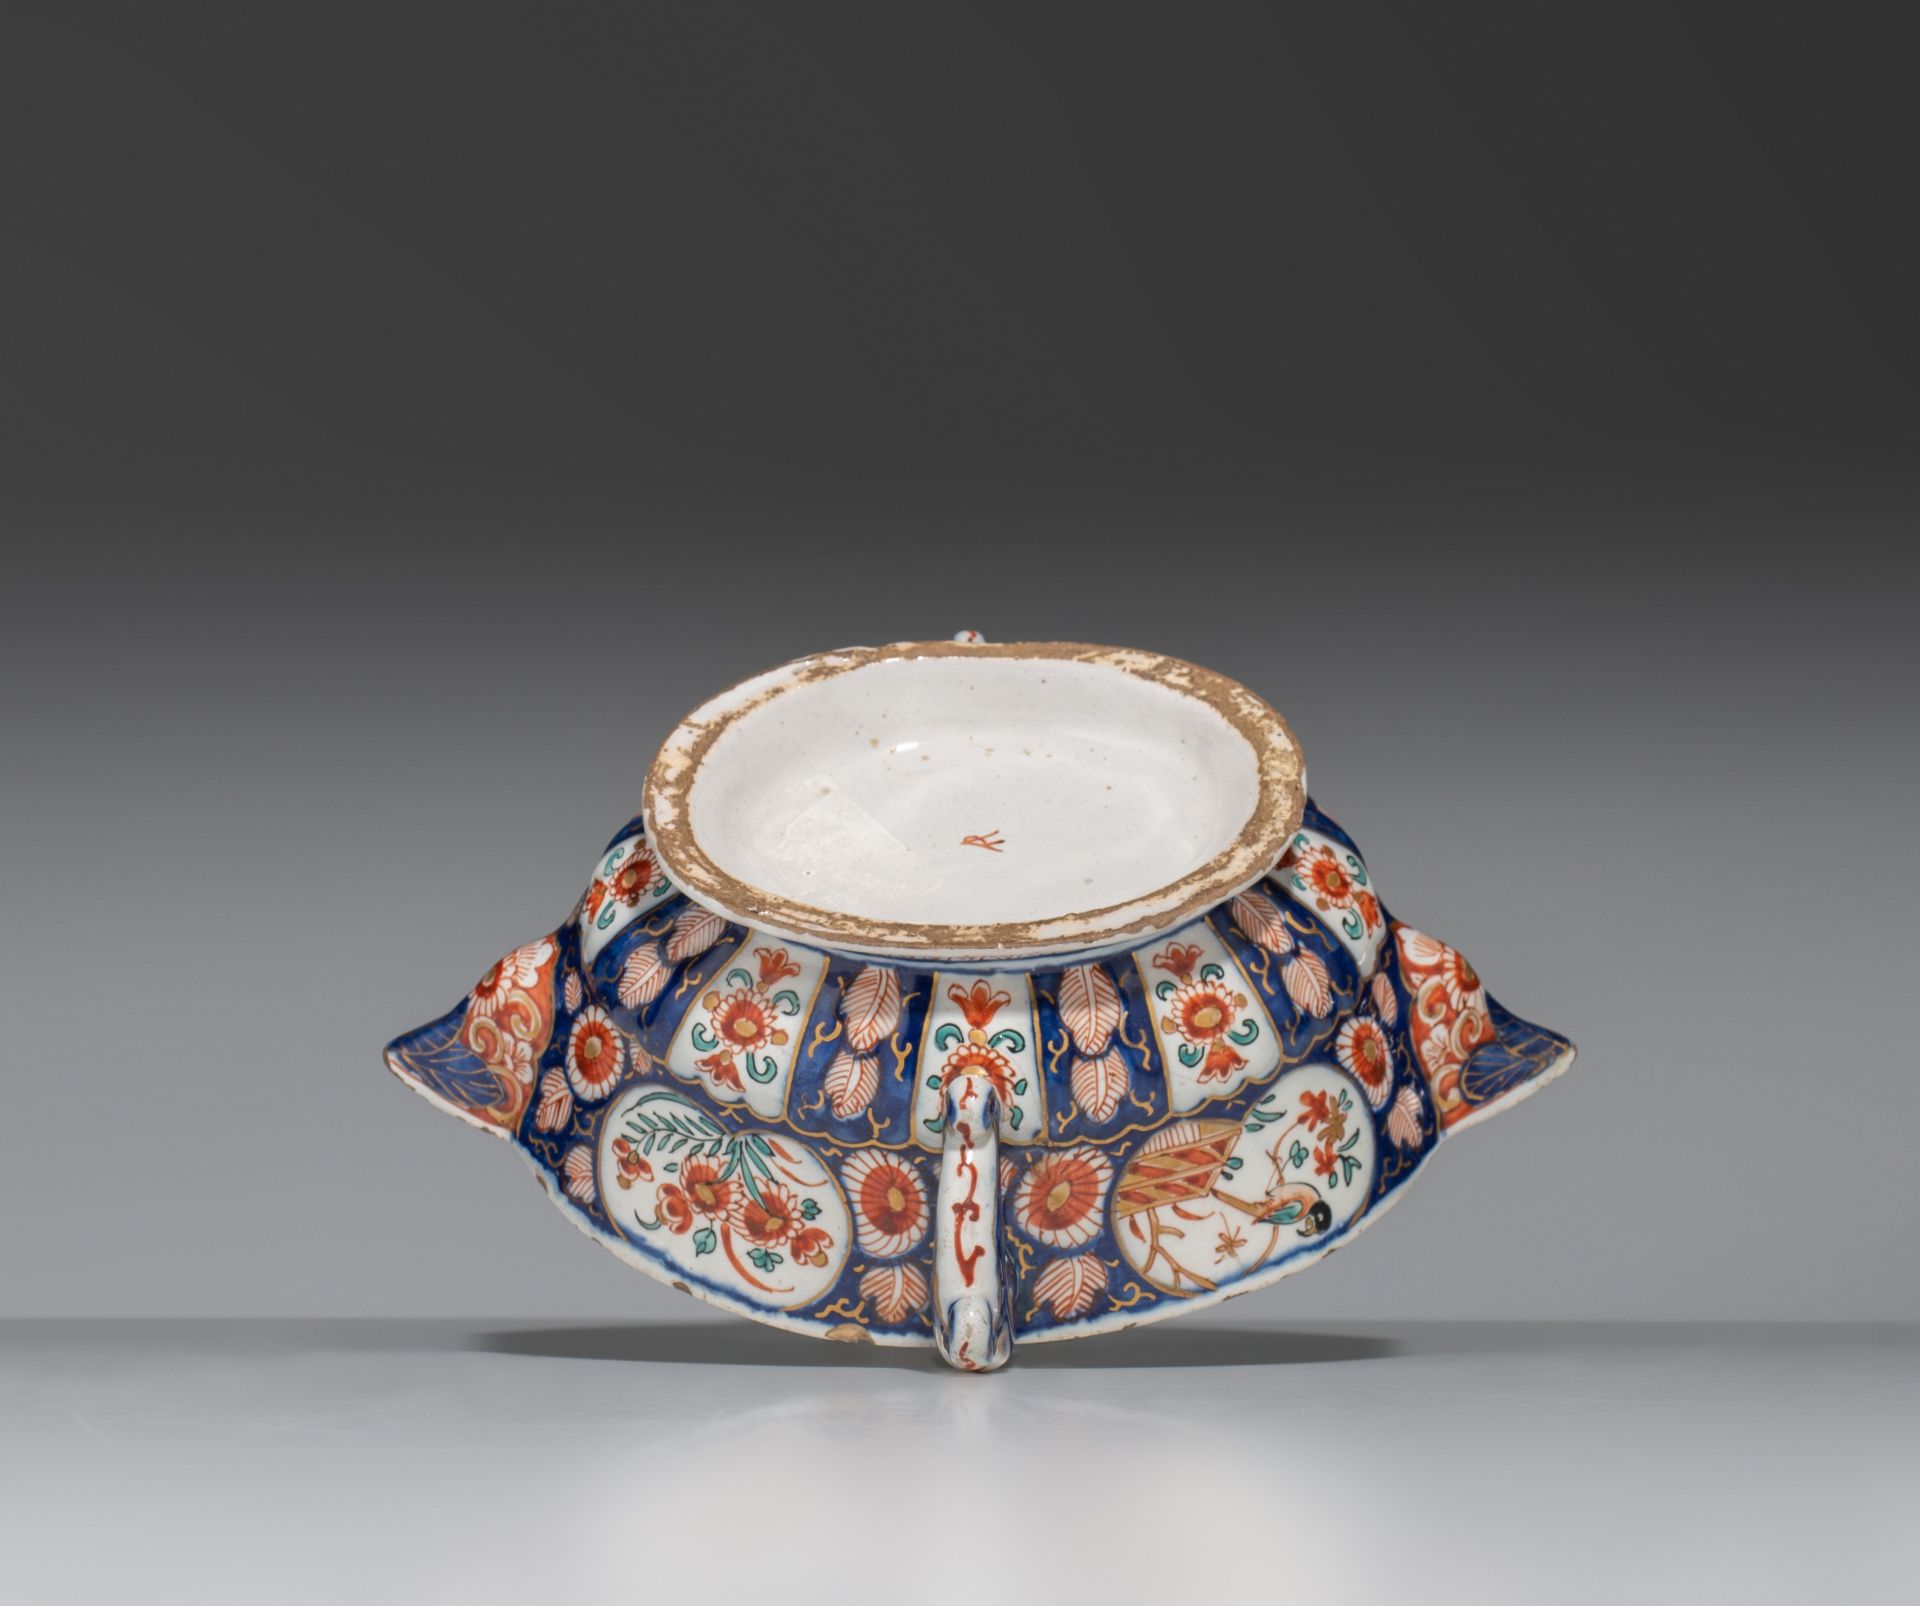 A various collection of 17th/18thC Dutch Delft Imari-style plates and a saucer, ø 22 / H 6 cm - Image 12 of 14